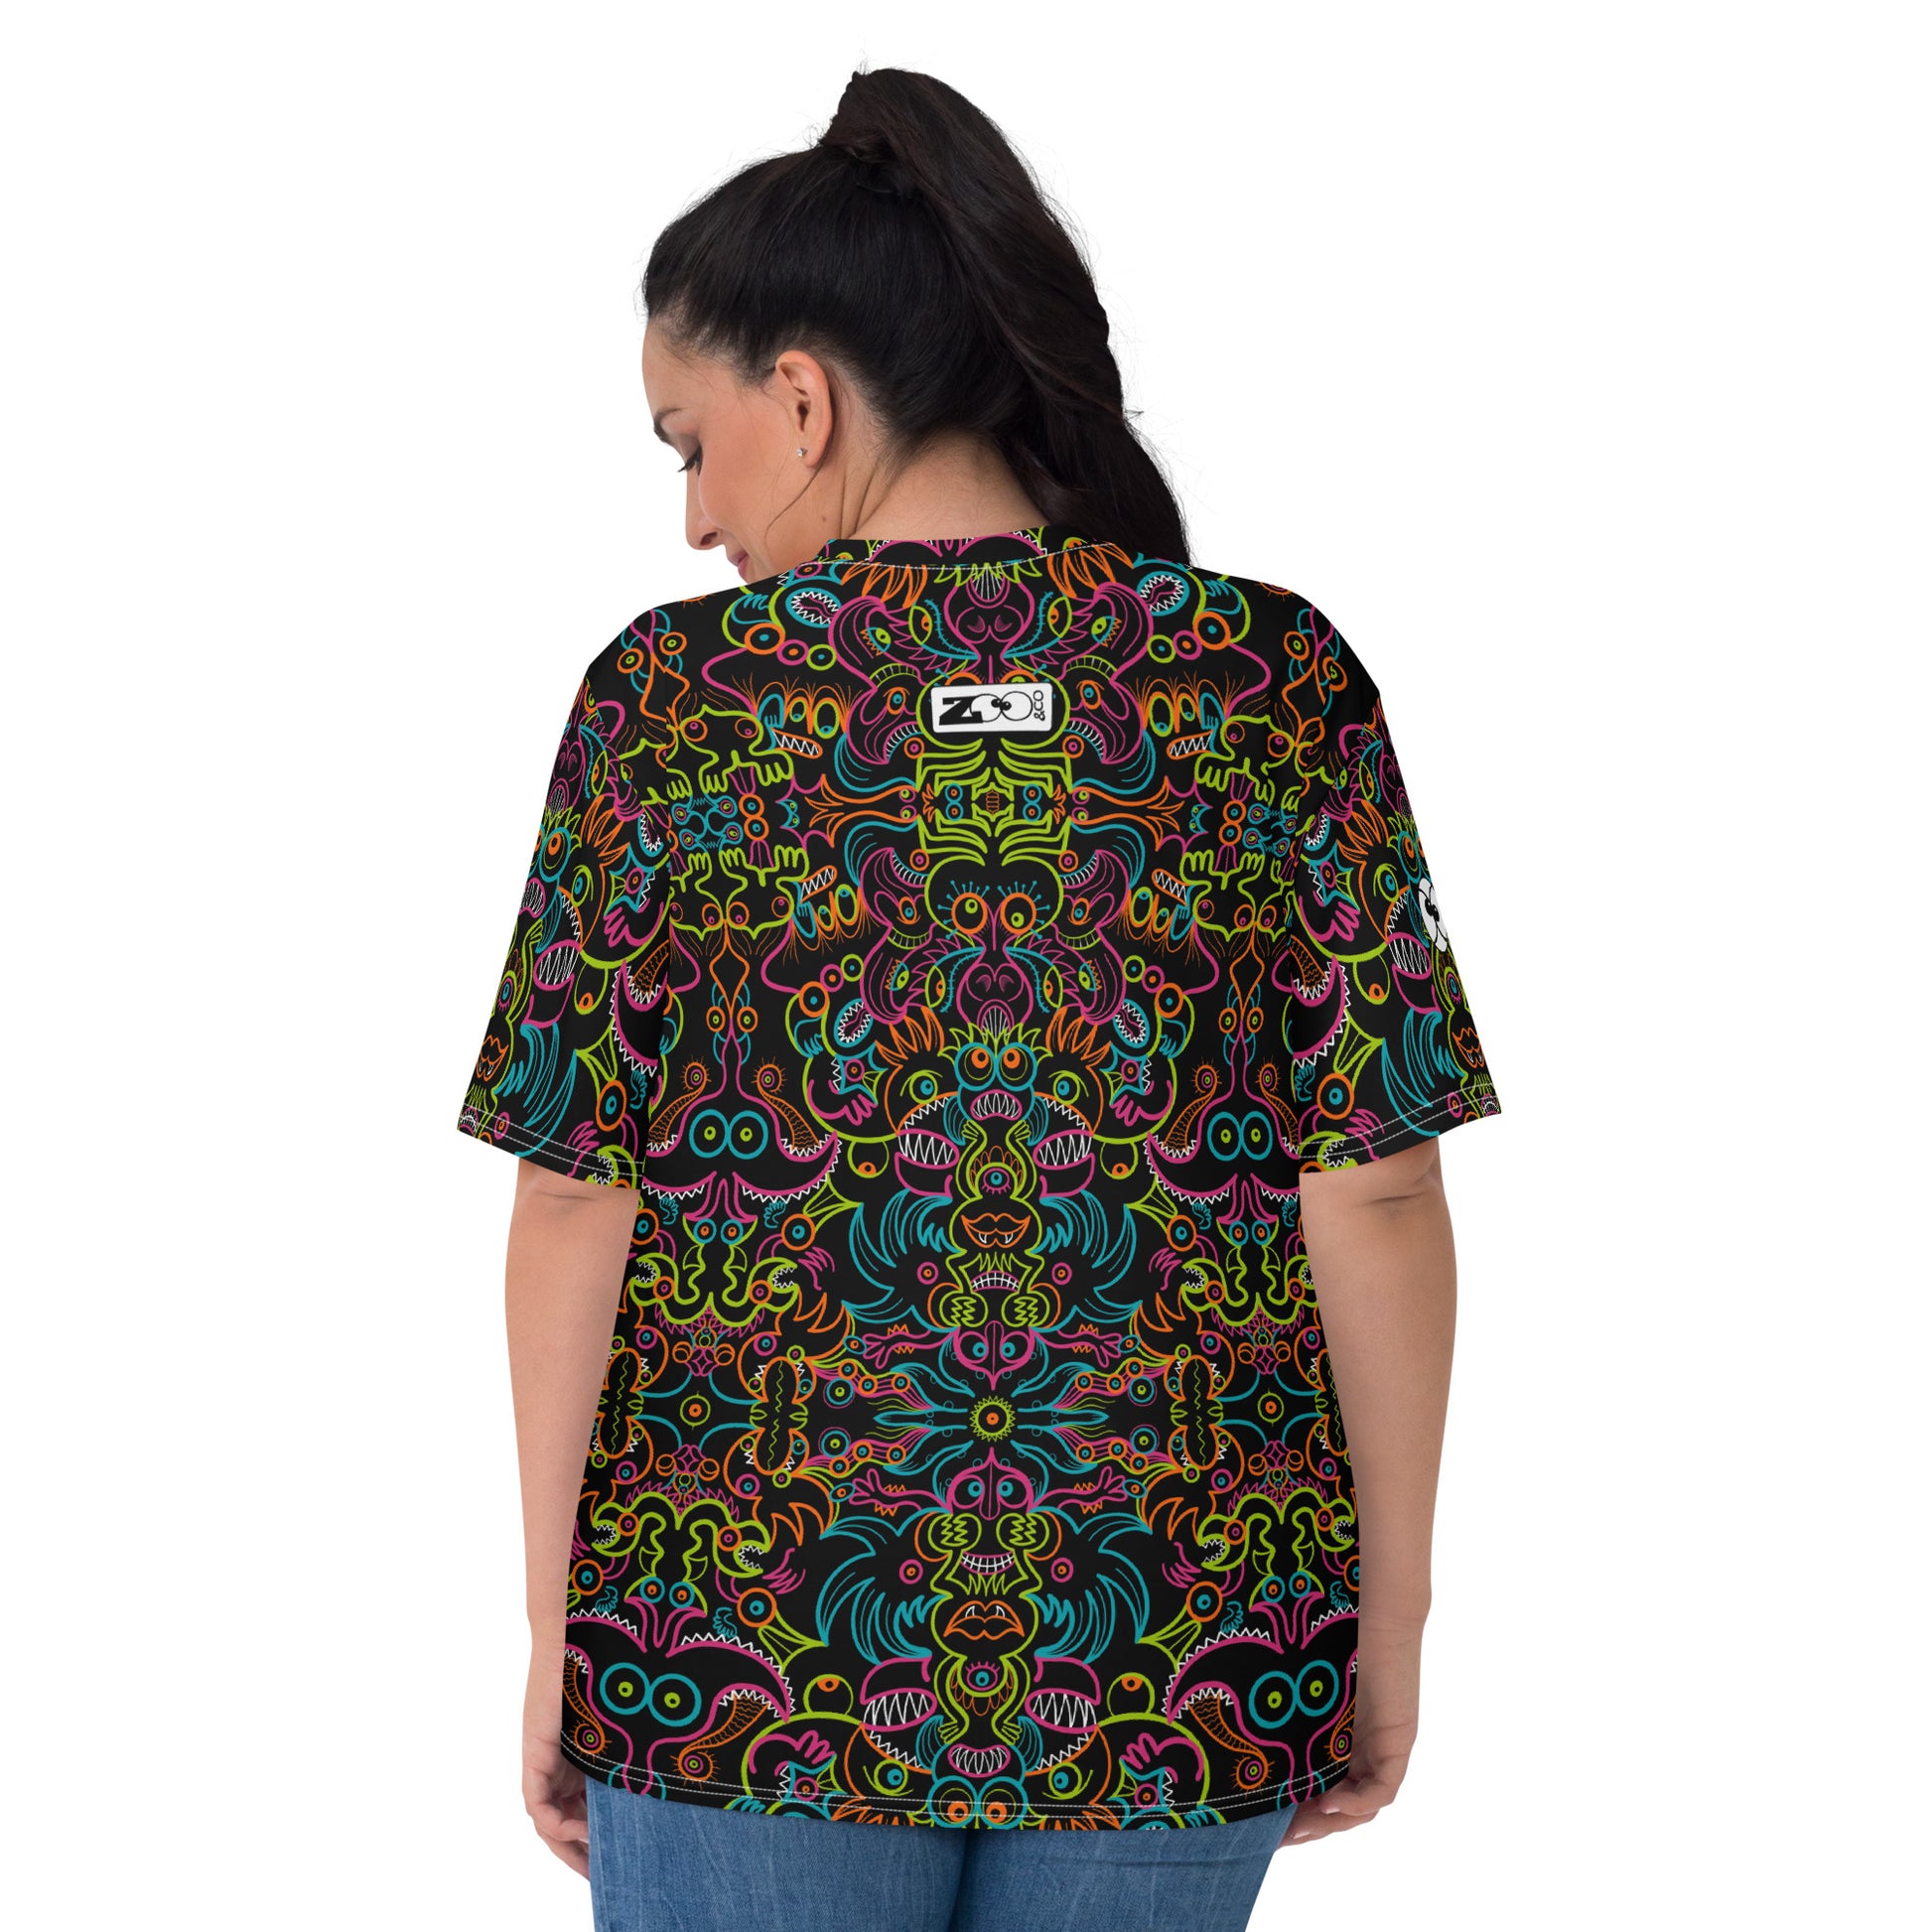 Doodle Carnival: A Kaleidoscope of Whimsical Wonders! - All-over print Women's T-shirt. Back view